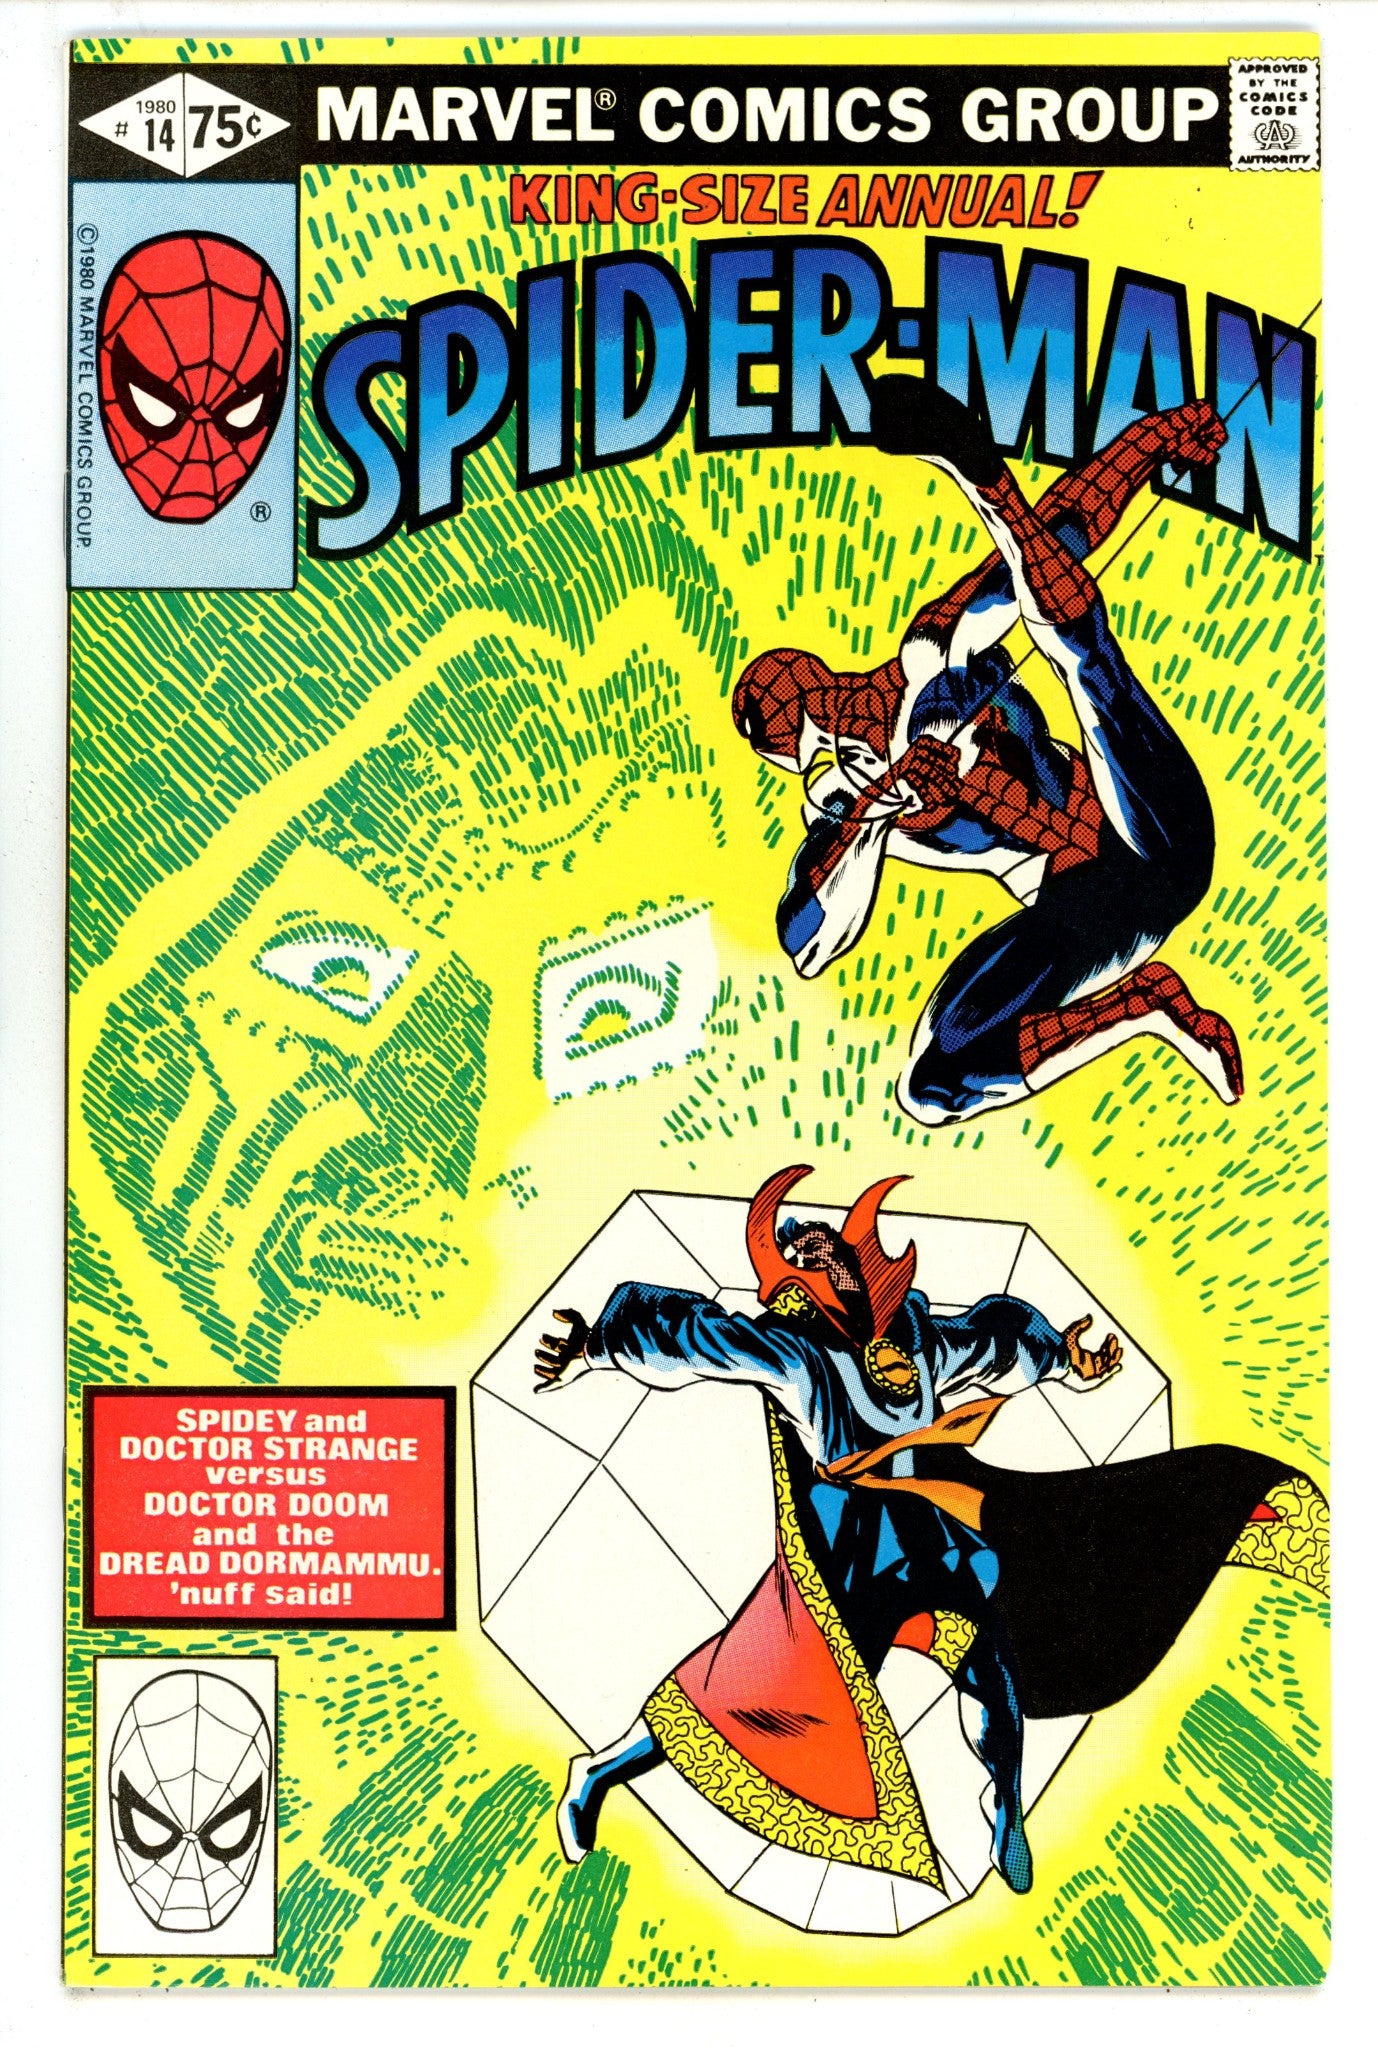 The Amazing Spider-Man Annual Vol 1 14 FN/VF (7.0) (1980) 